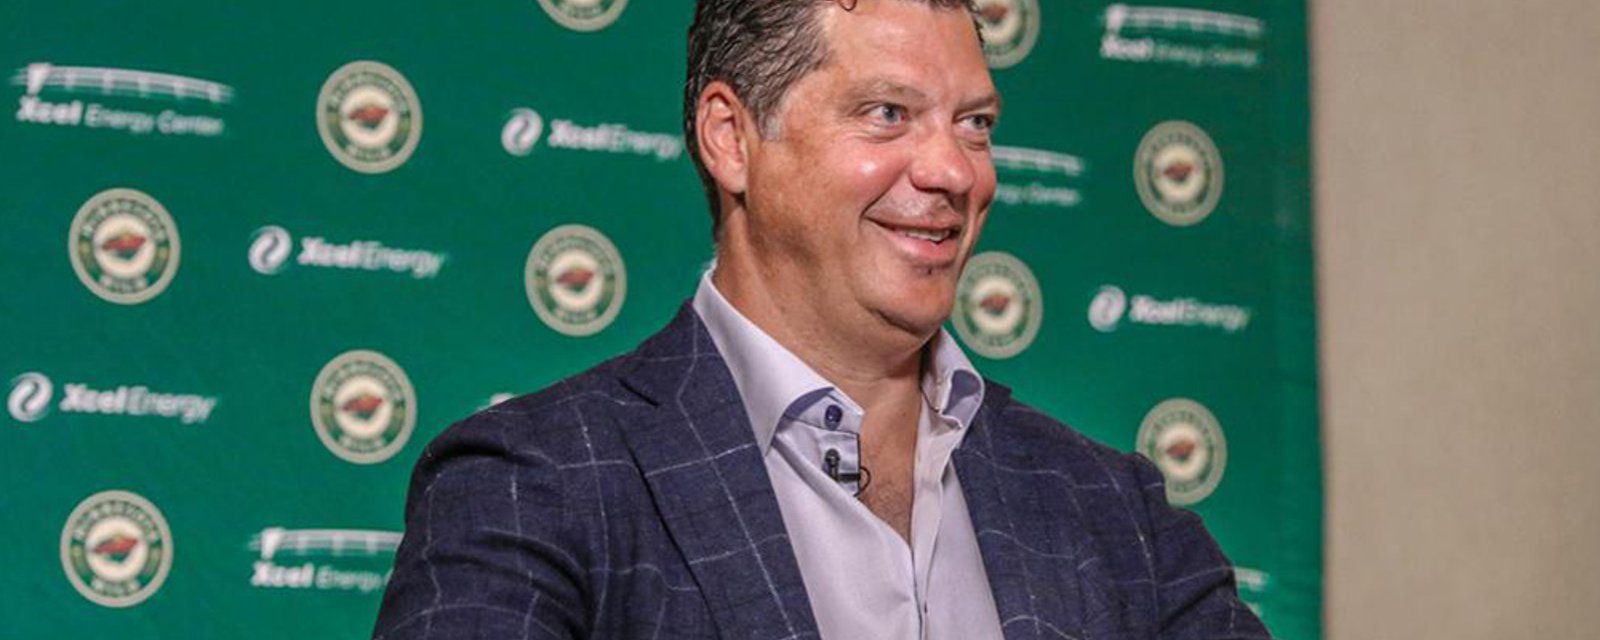 Bill Guerin's latest comments will make Minnesota Wild fans smile 